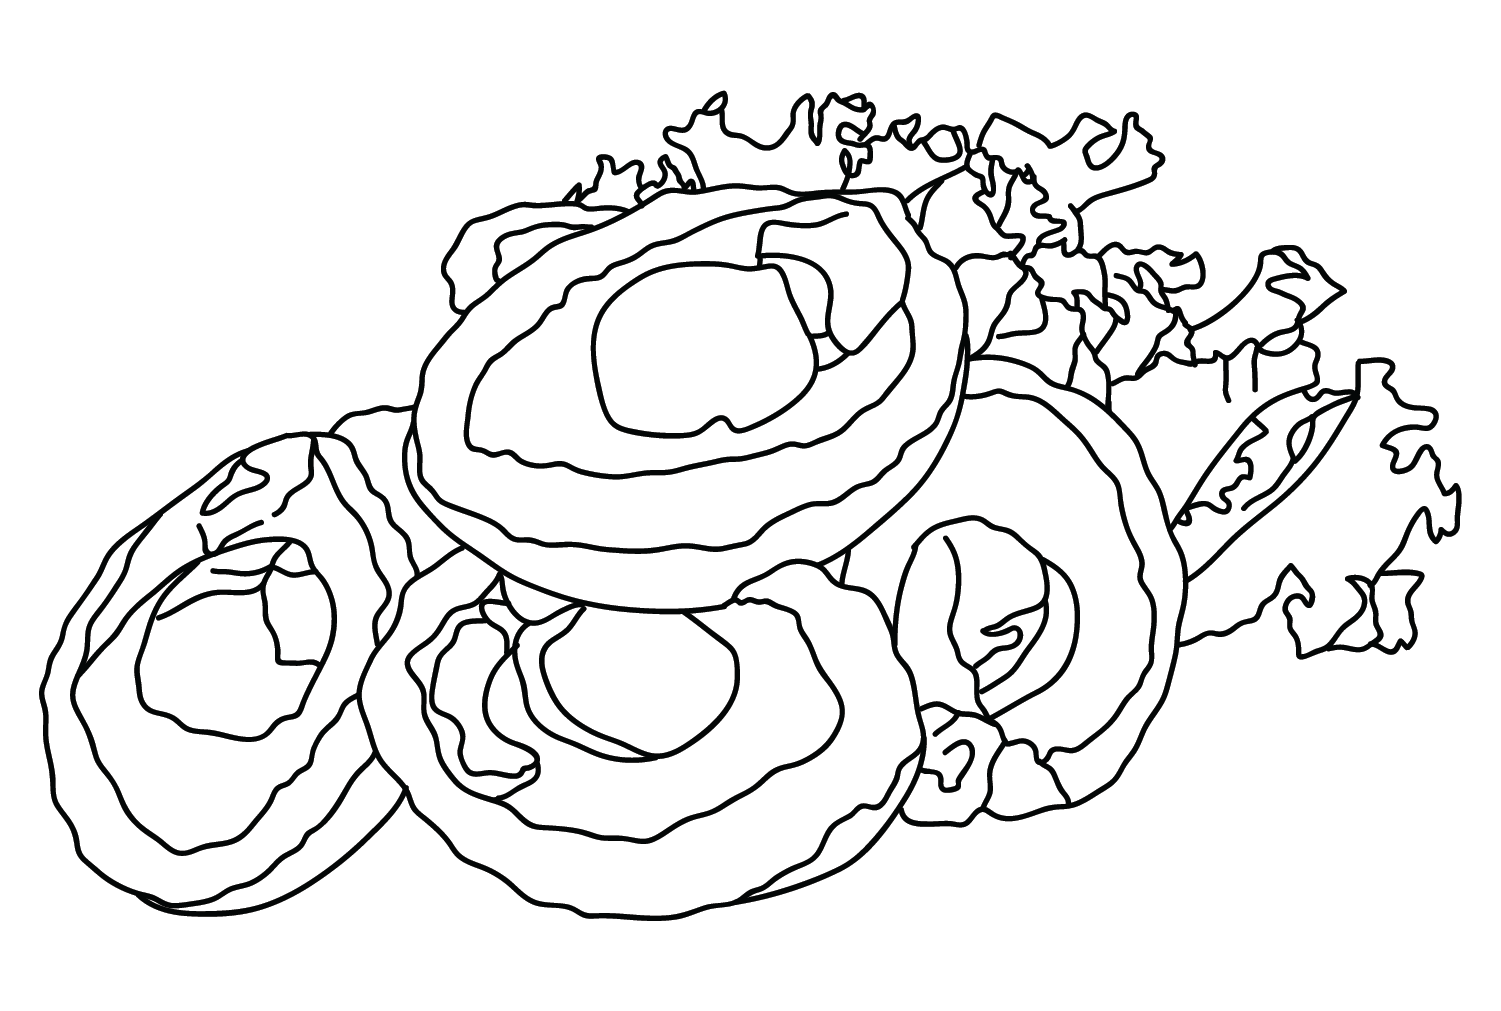 Abalone Coloring Sheet from Abalone